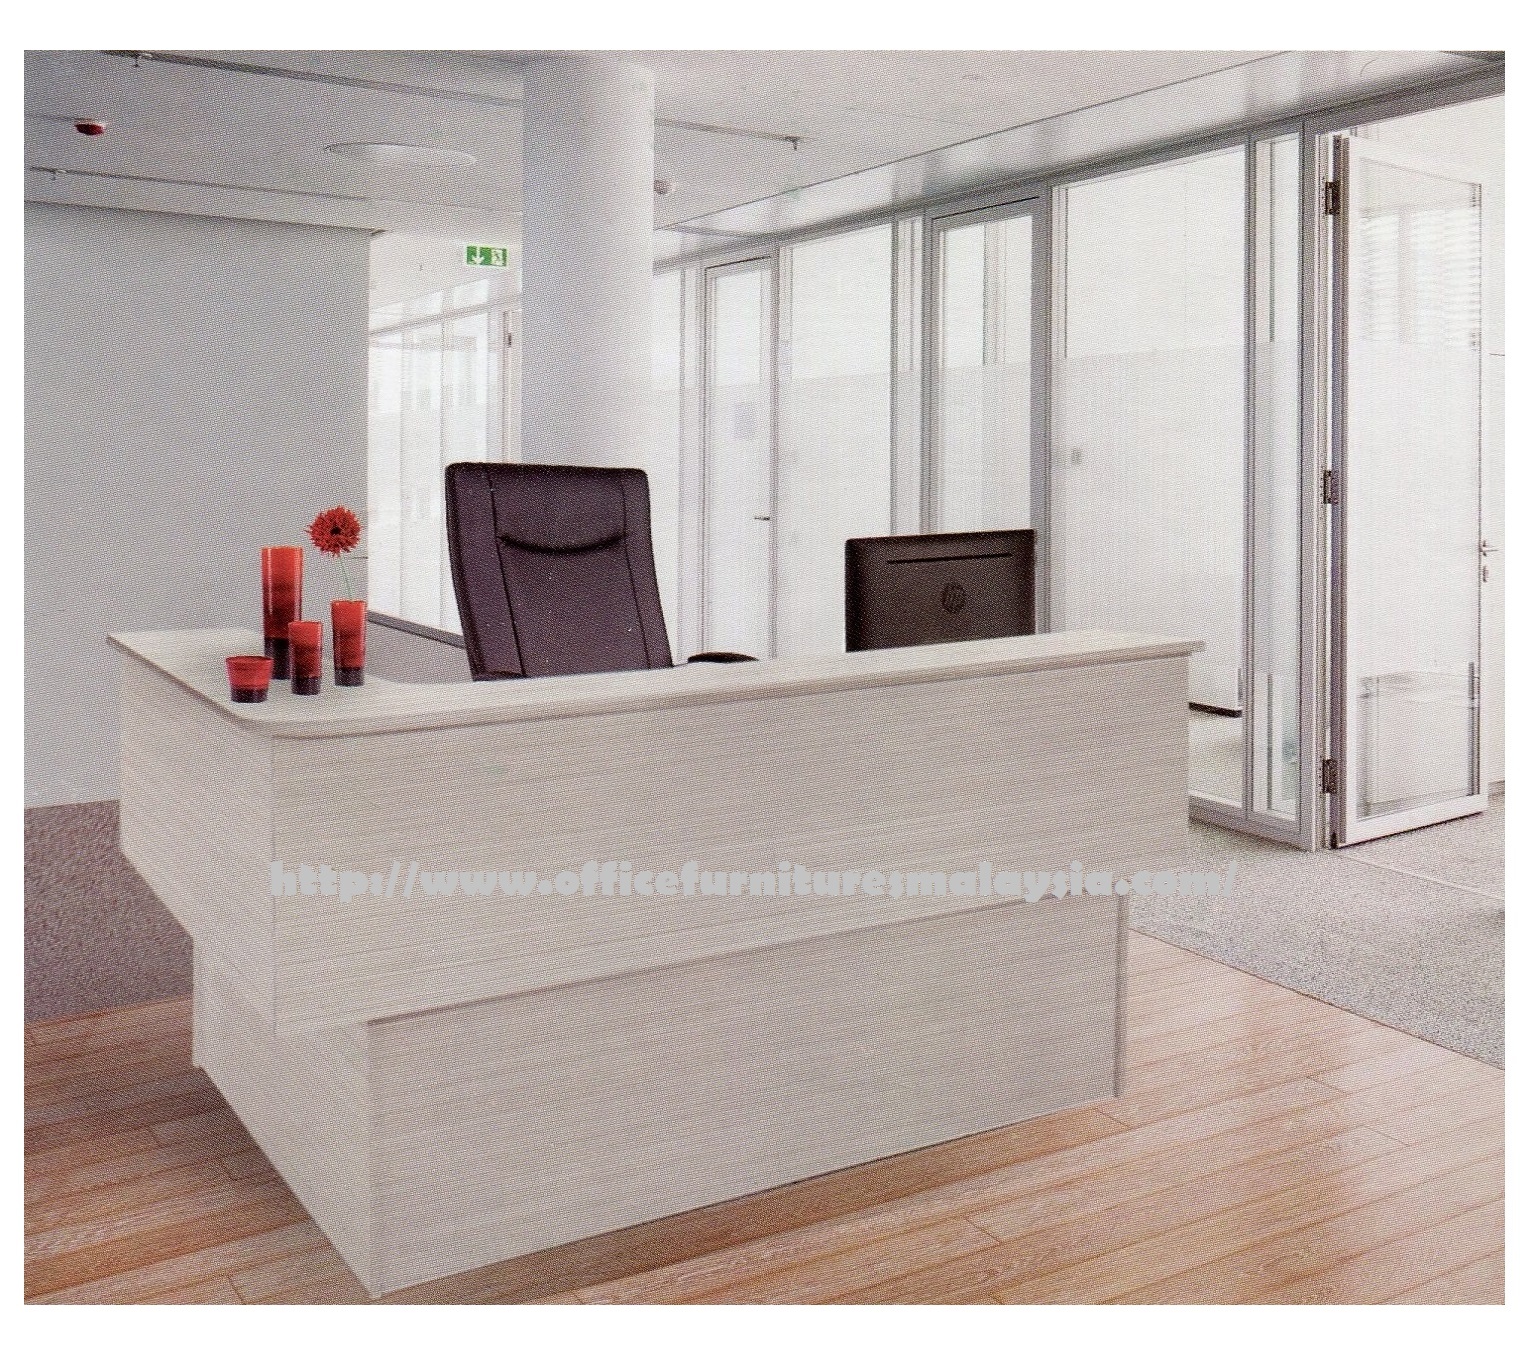 Office Reception Counter Table Desk - Office Furnitures ...